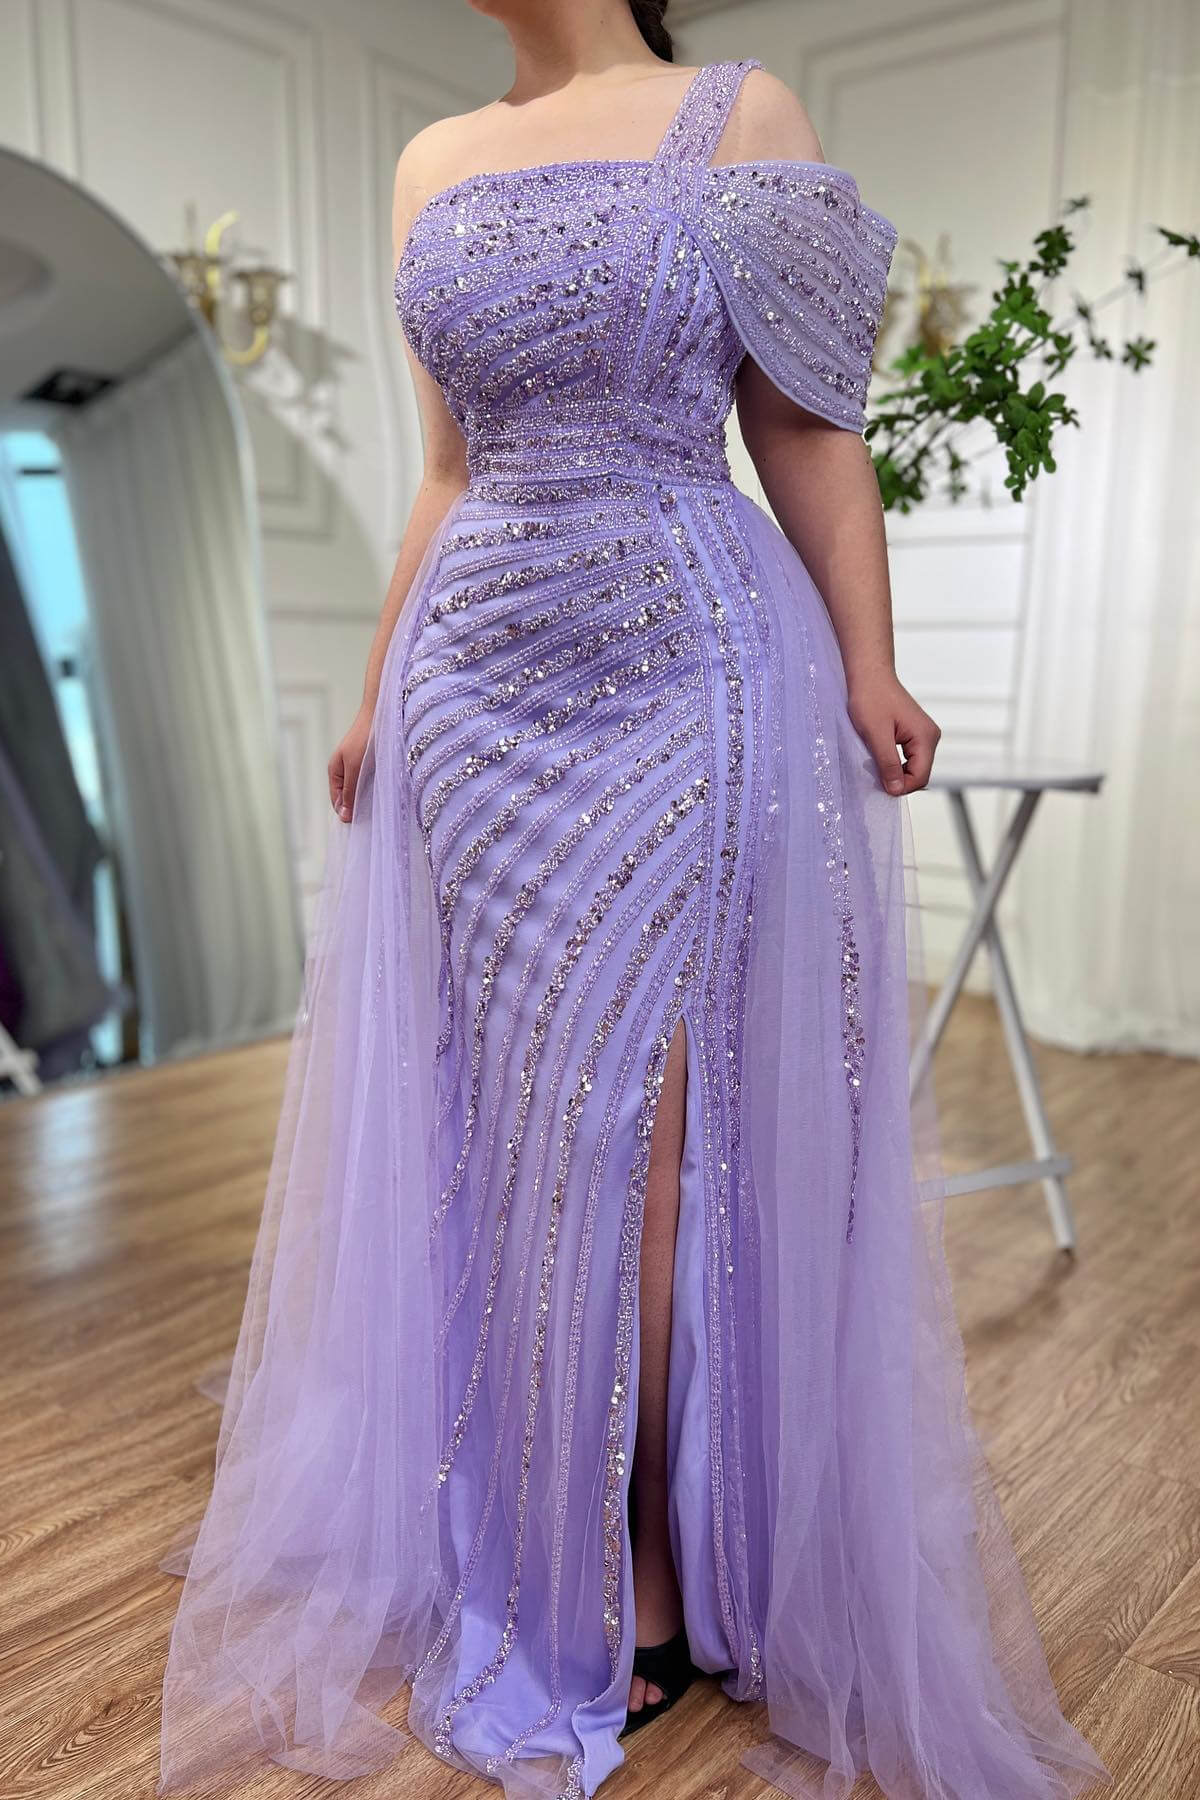 Luluslly Lilac One Shoulder Mermaid Evening Dress Beadings Long With Split